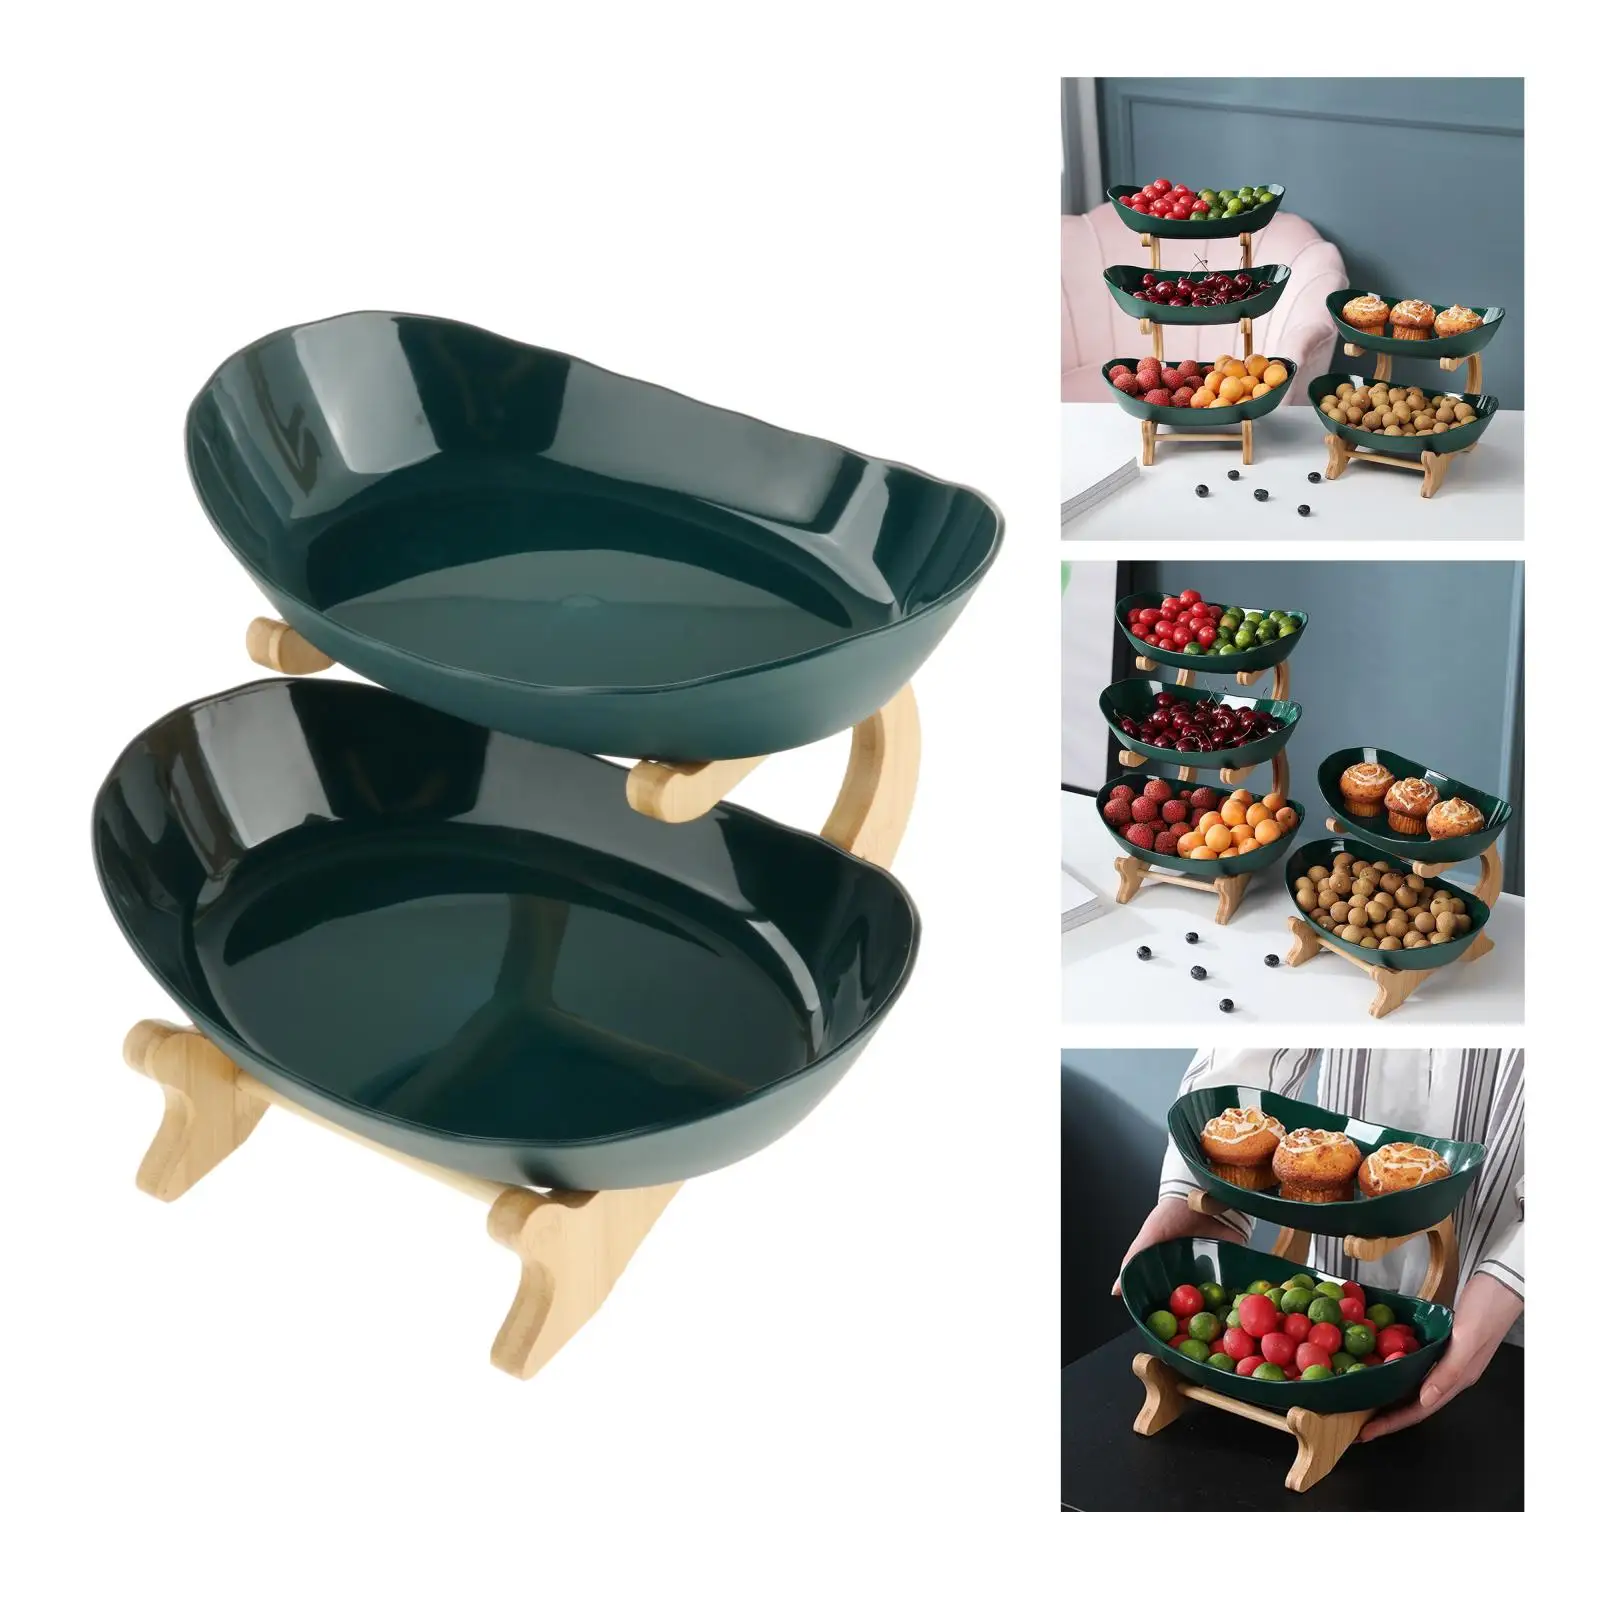 Elegant Tiered Tray Fruit Plate Appetizer Snacks Candy Shelves Organizer